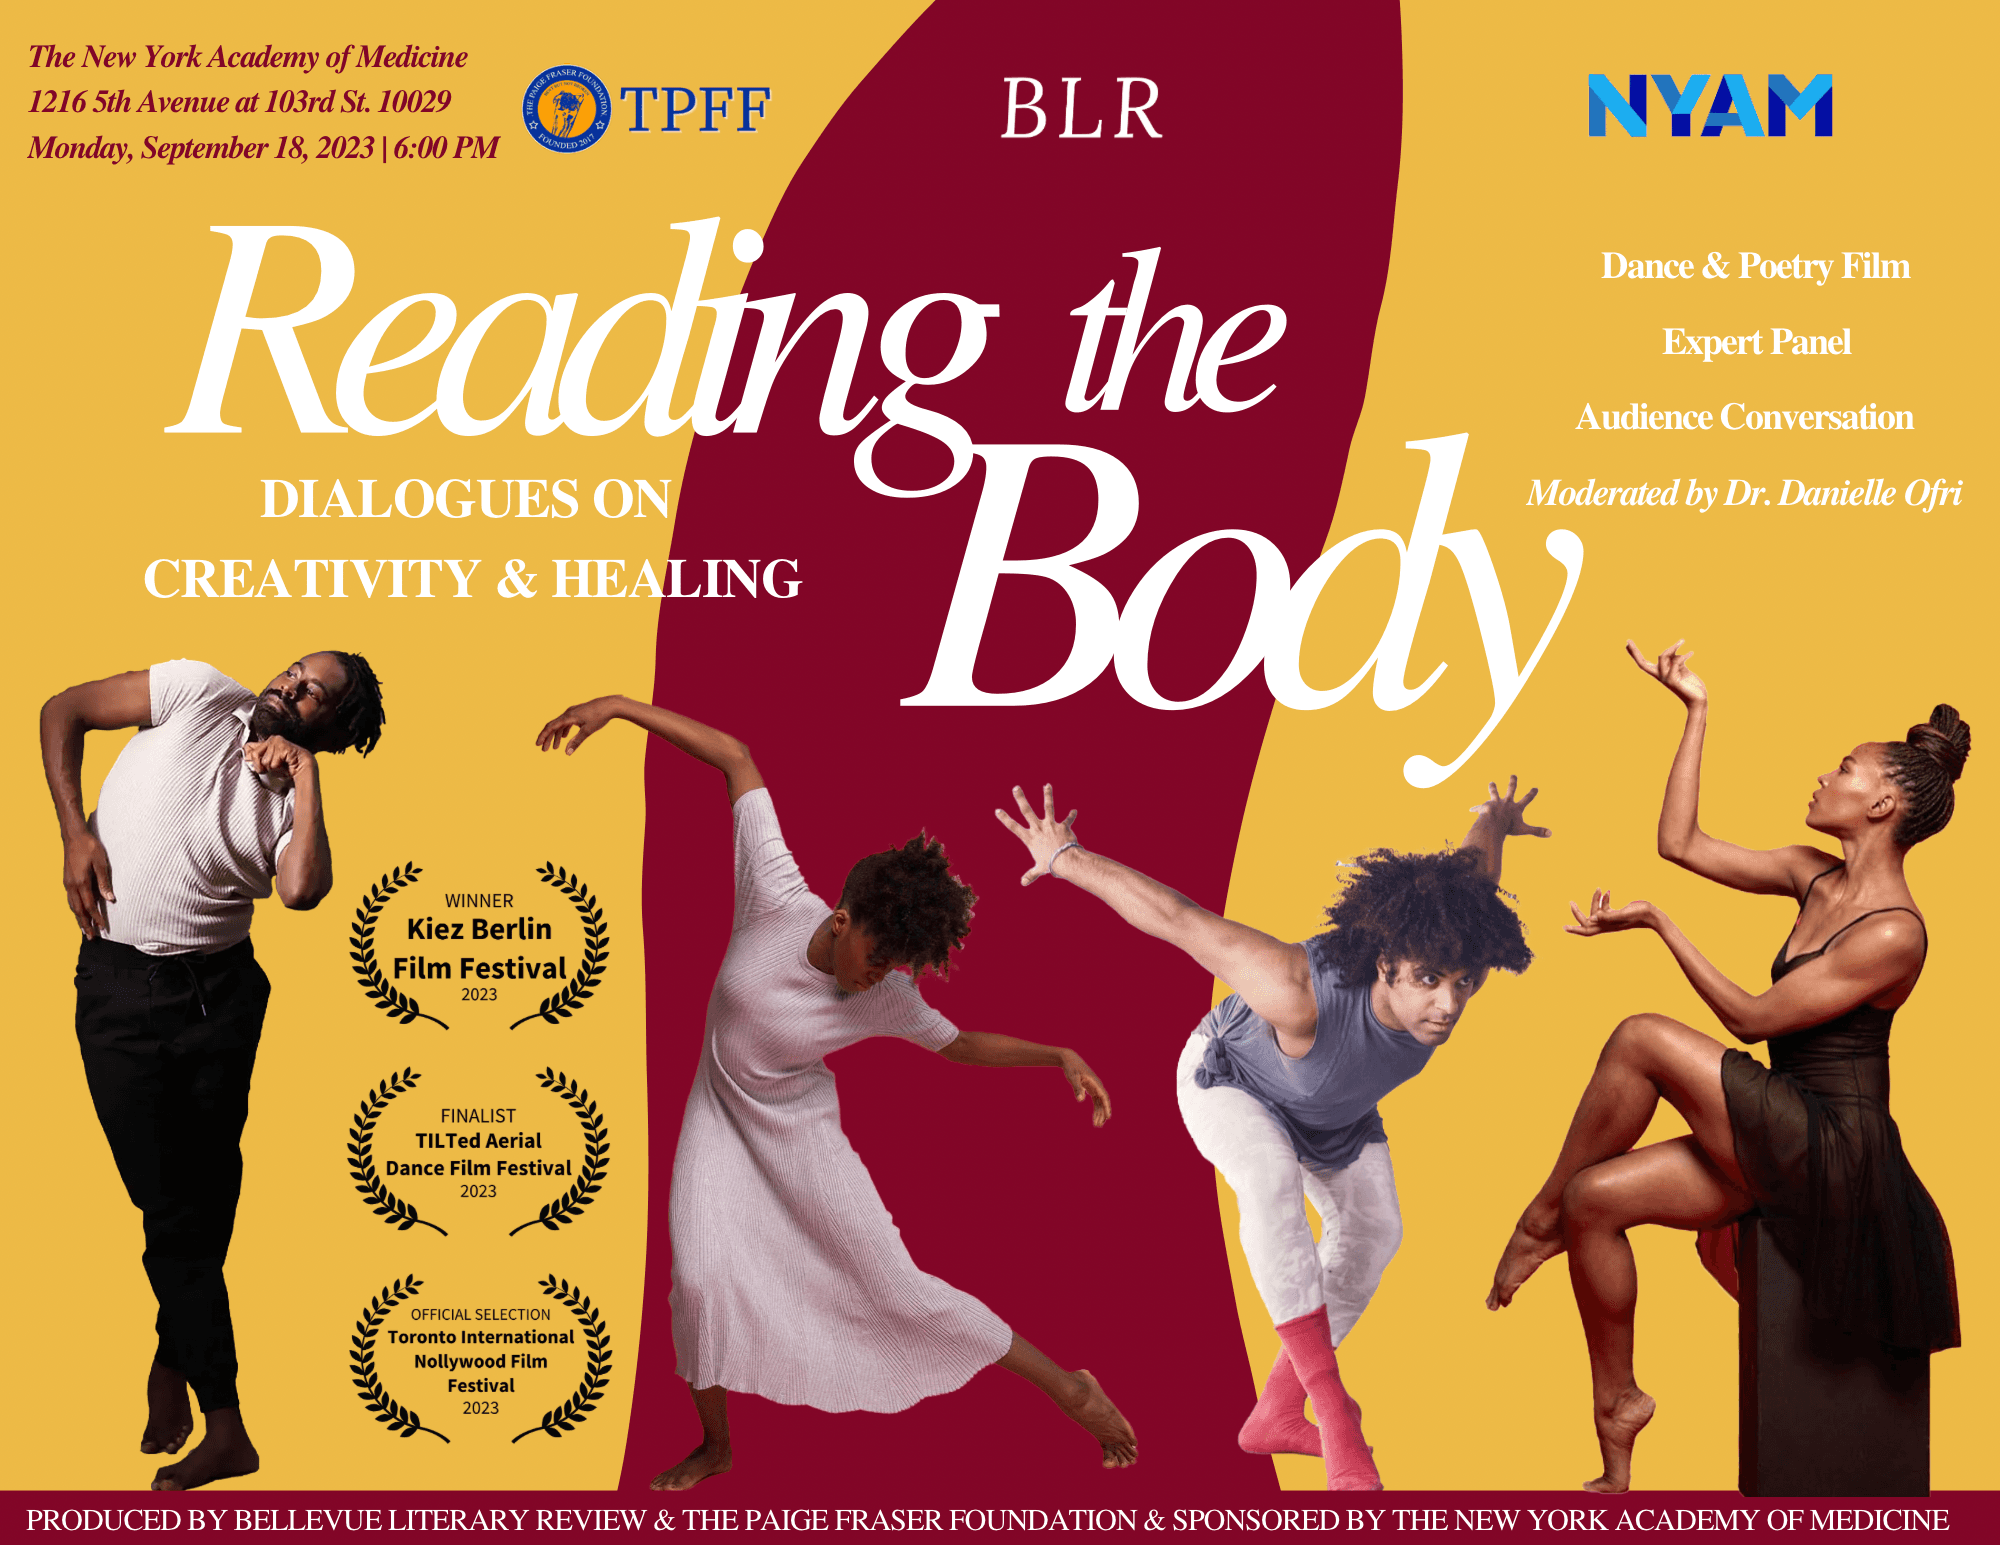 Reading the Body: Recovery at NYAM on 9/18/23 at 6pm